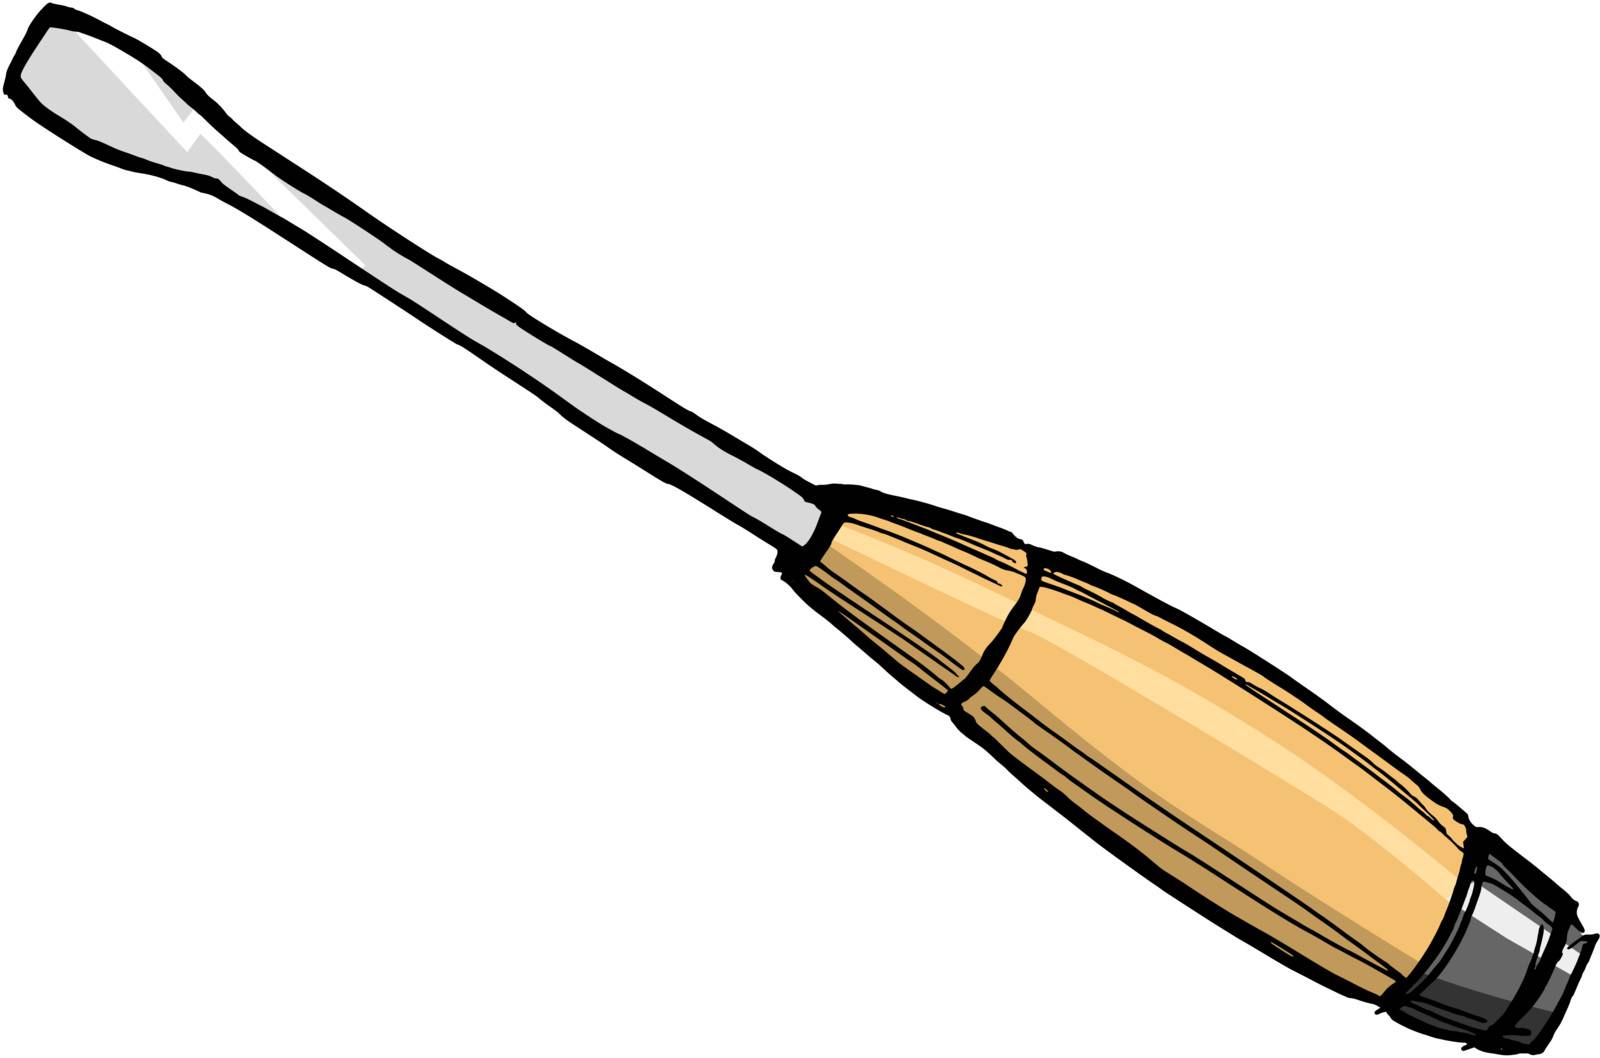 Hand drawn illustration of a screwdriver on white